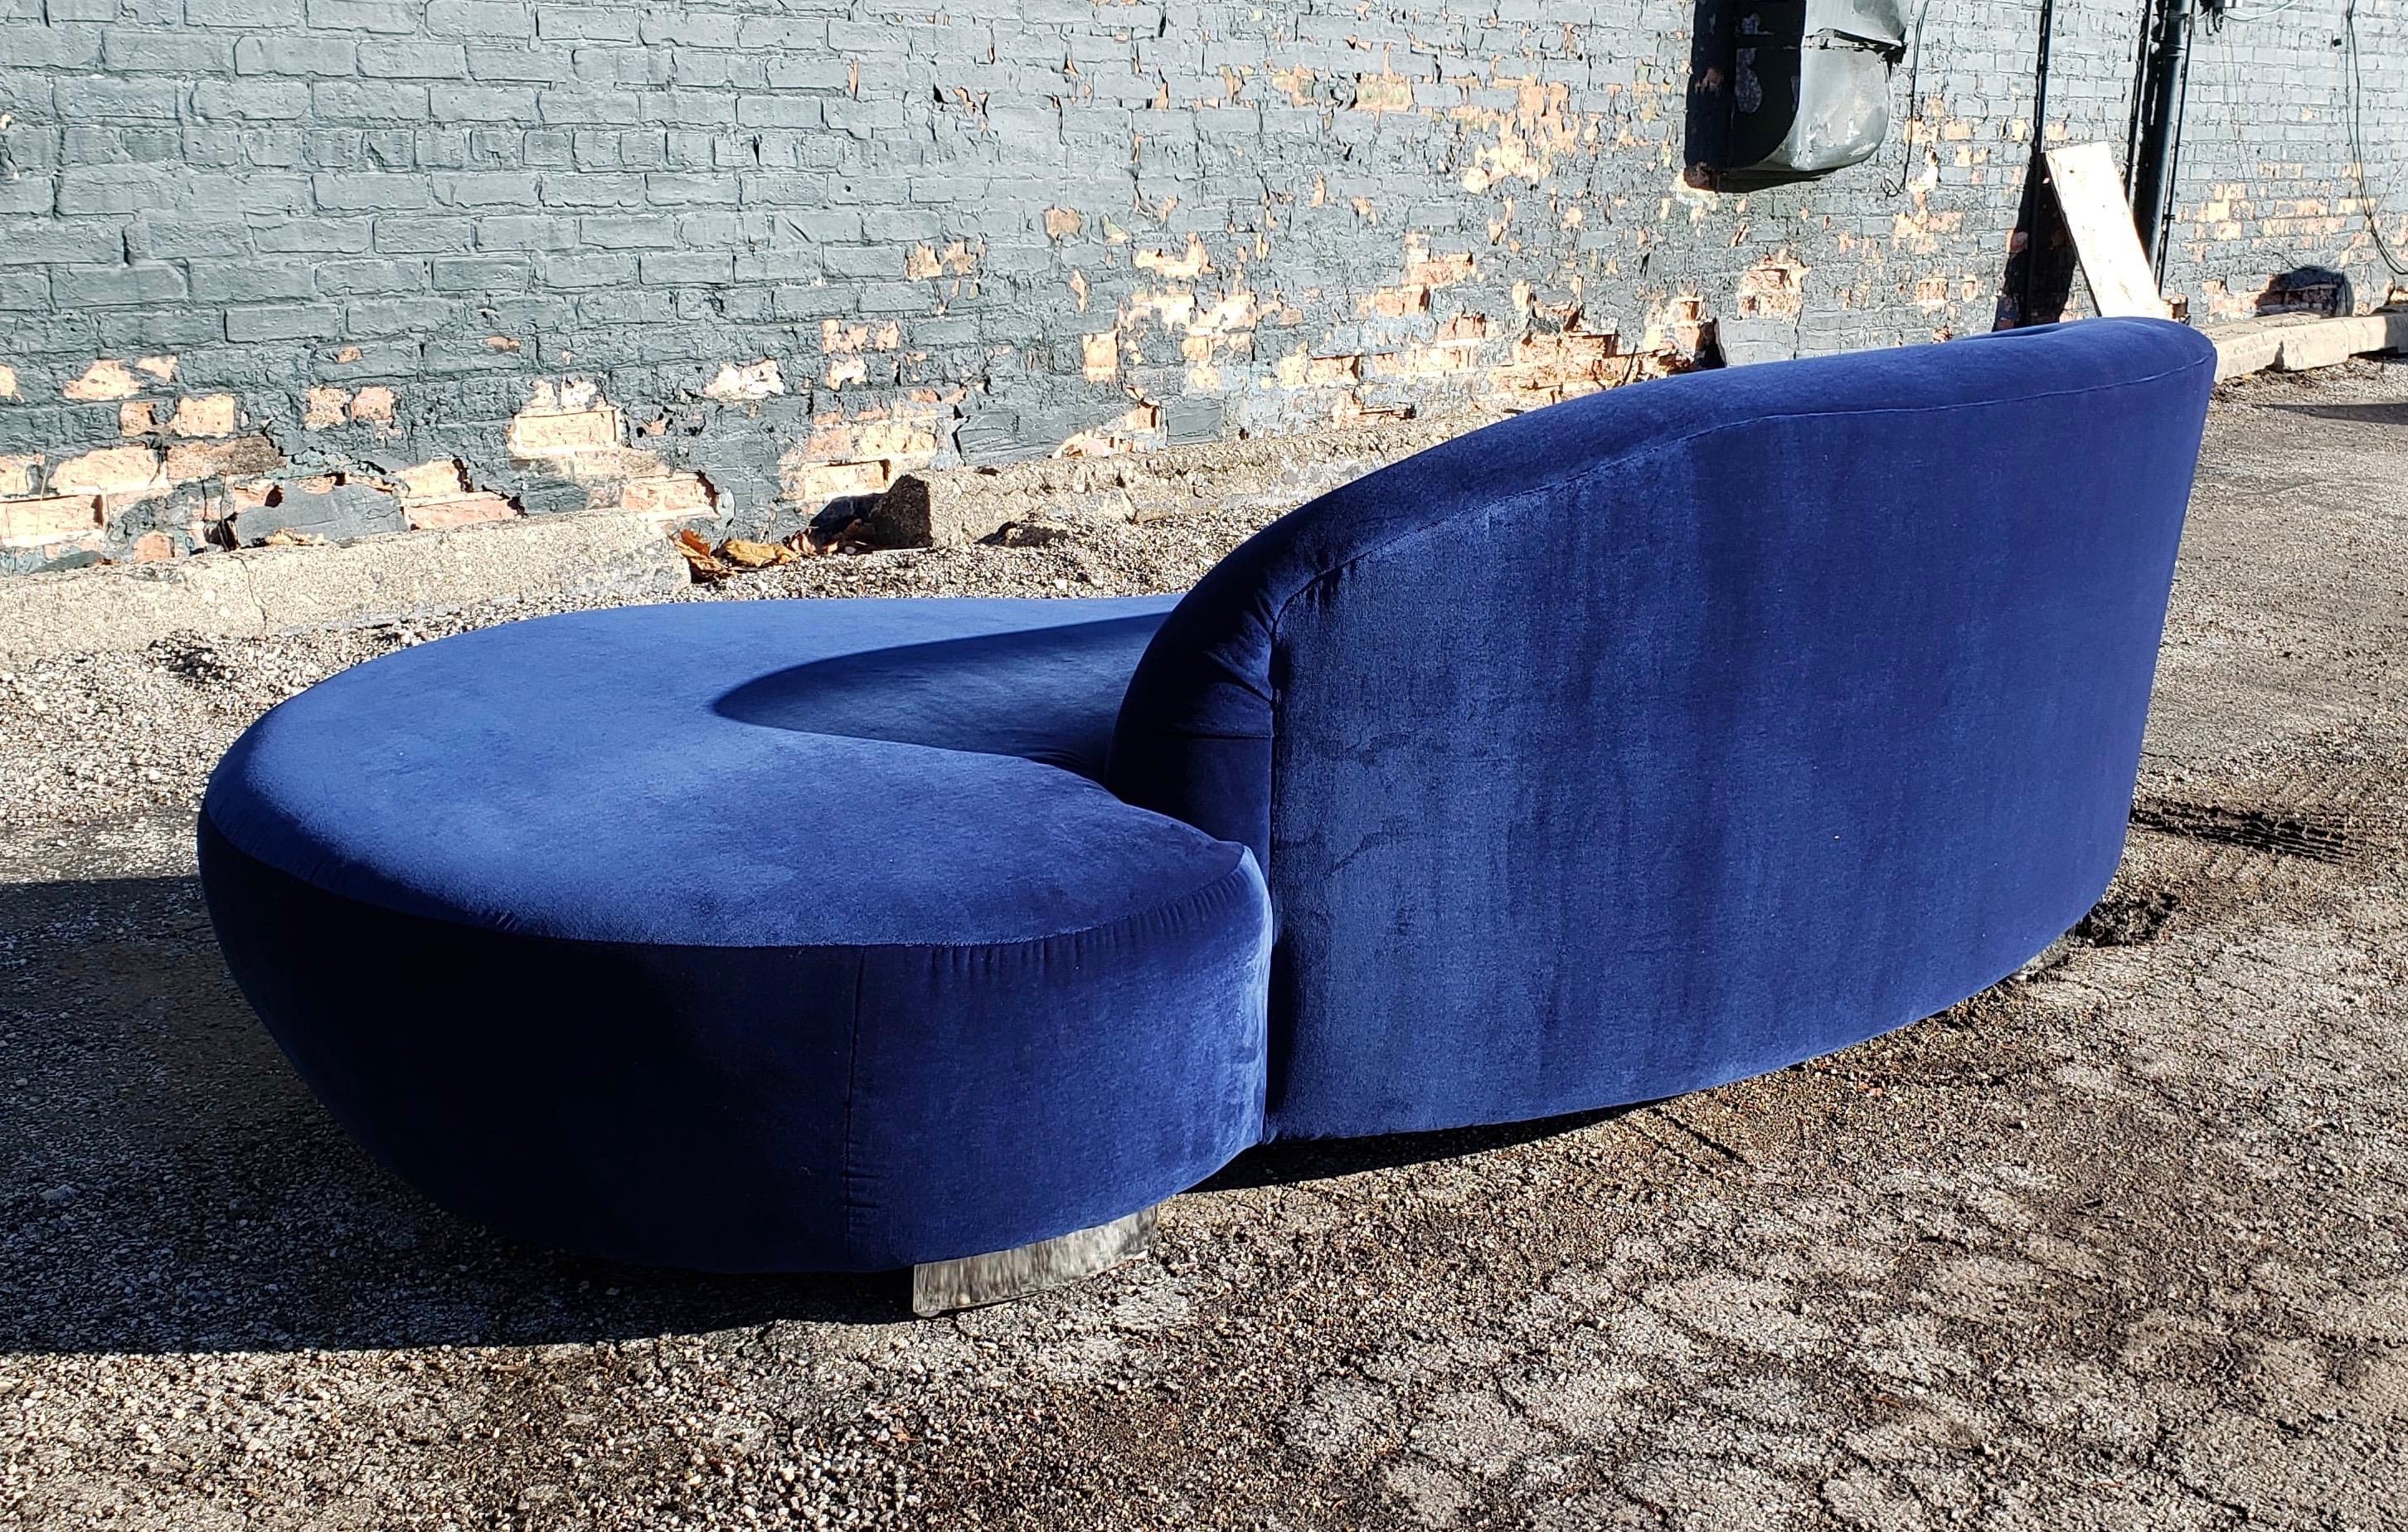 Kagan's famous biomorphic shape sofa in a coveted design has been fully restored in velvet. It's unique shape and curved chrome feet give the sofa a wonderful floating effect.